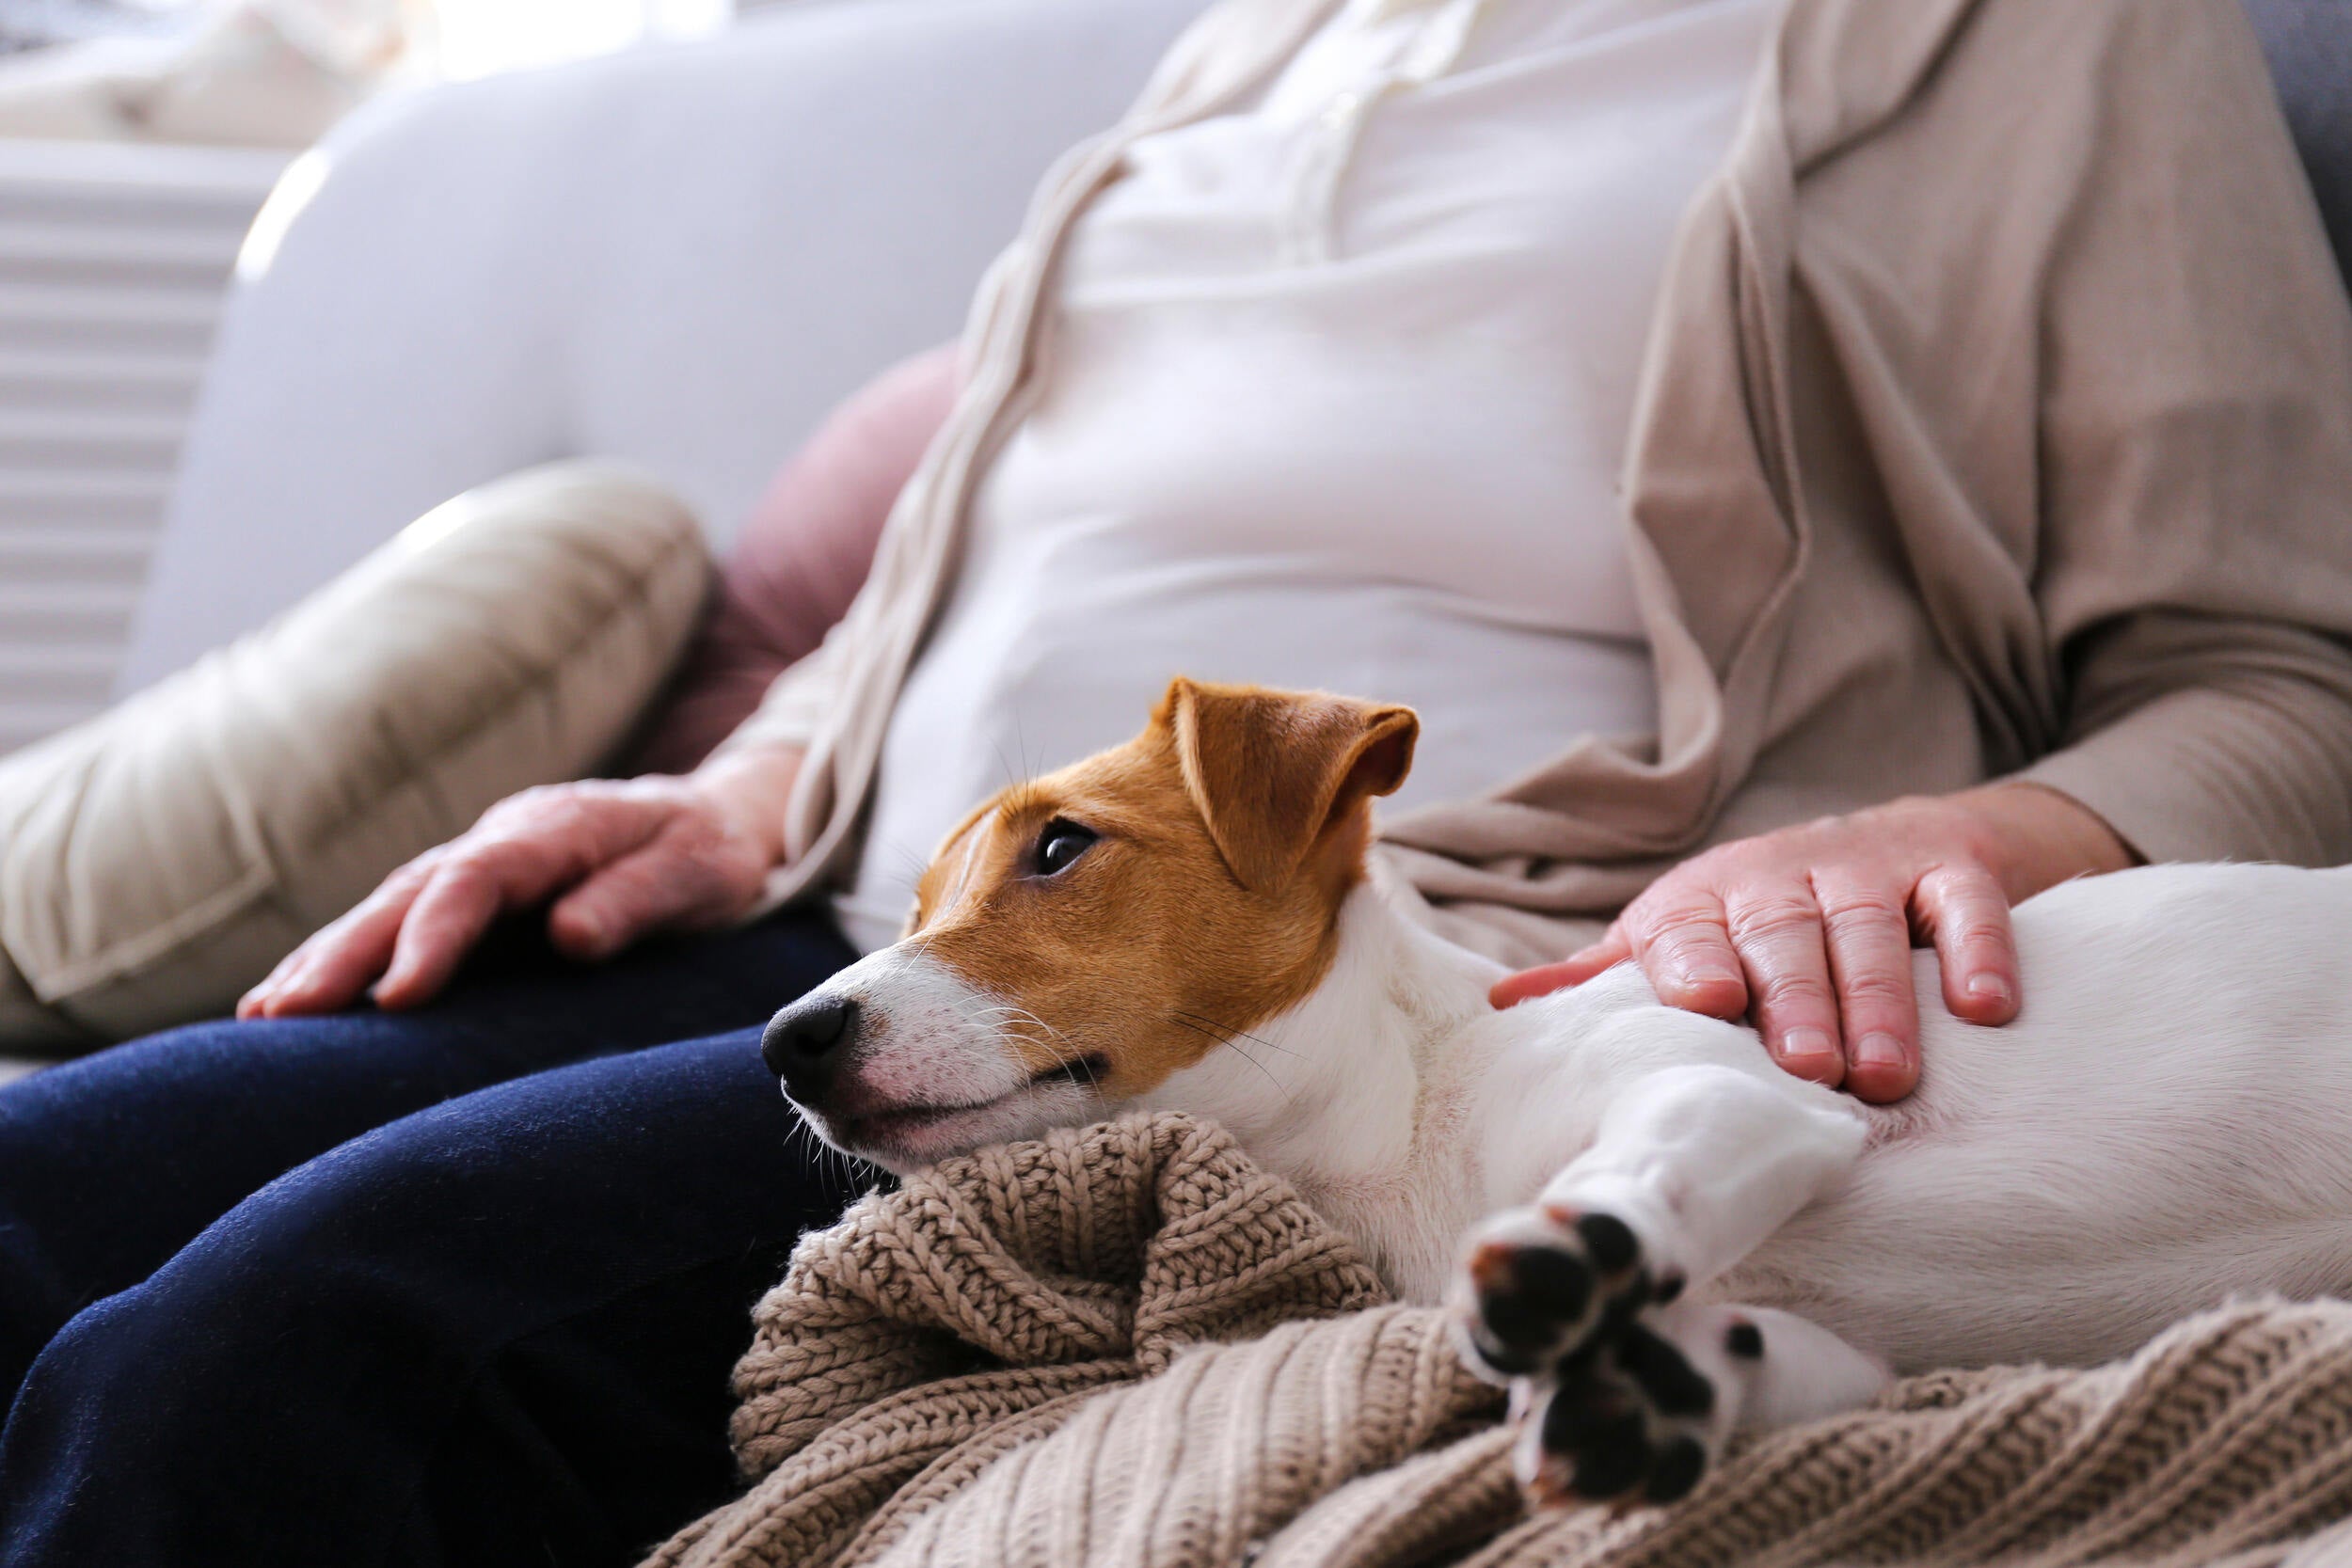 A Jack Russell looking relaxed, laid with its head in its owner's lap